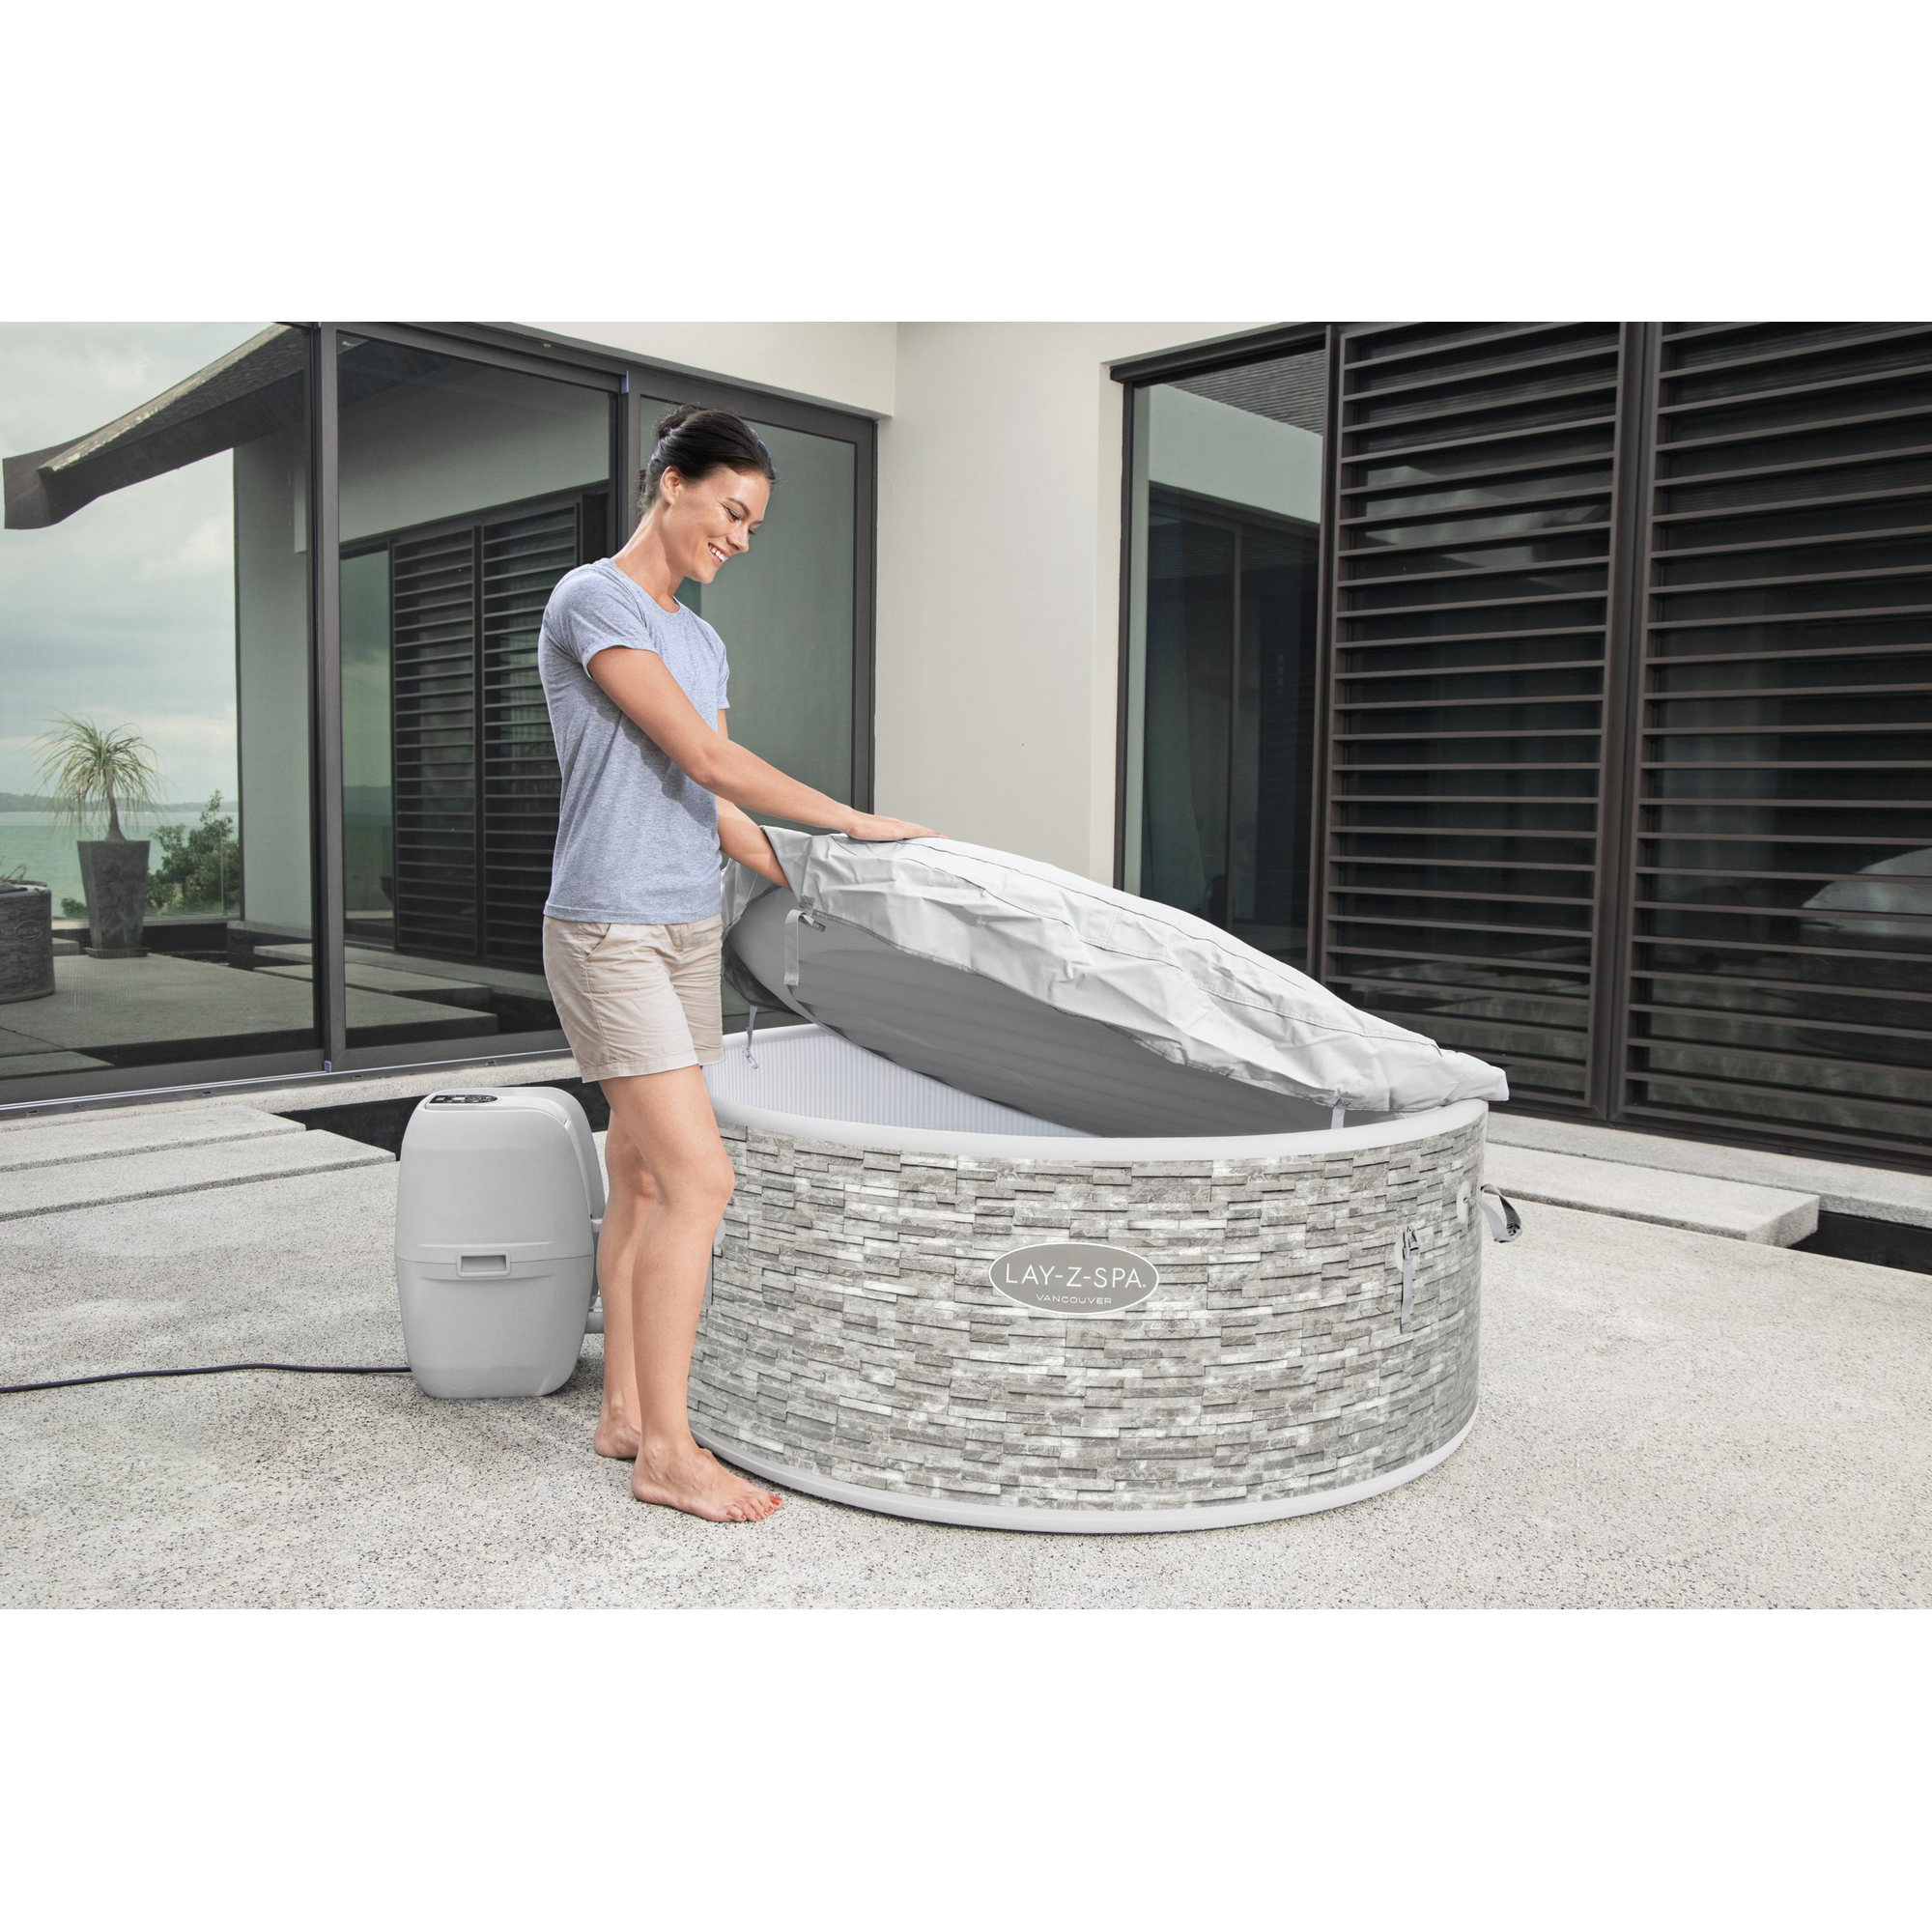 WLAN-Whirlpool 'LAY-Z-SPA Vancouver AirJet Plus' 155 x 60 cm grau + product picture